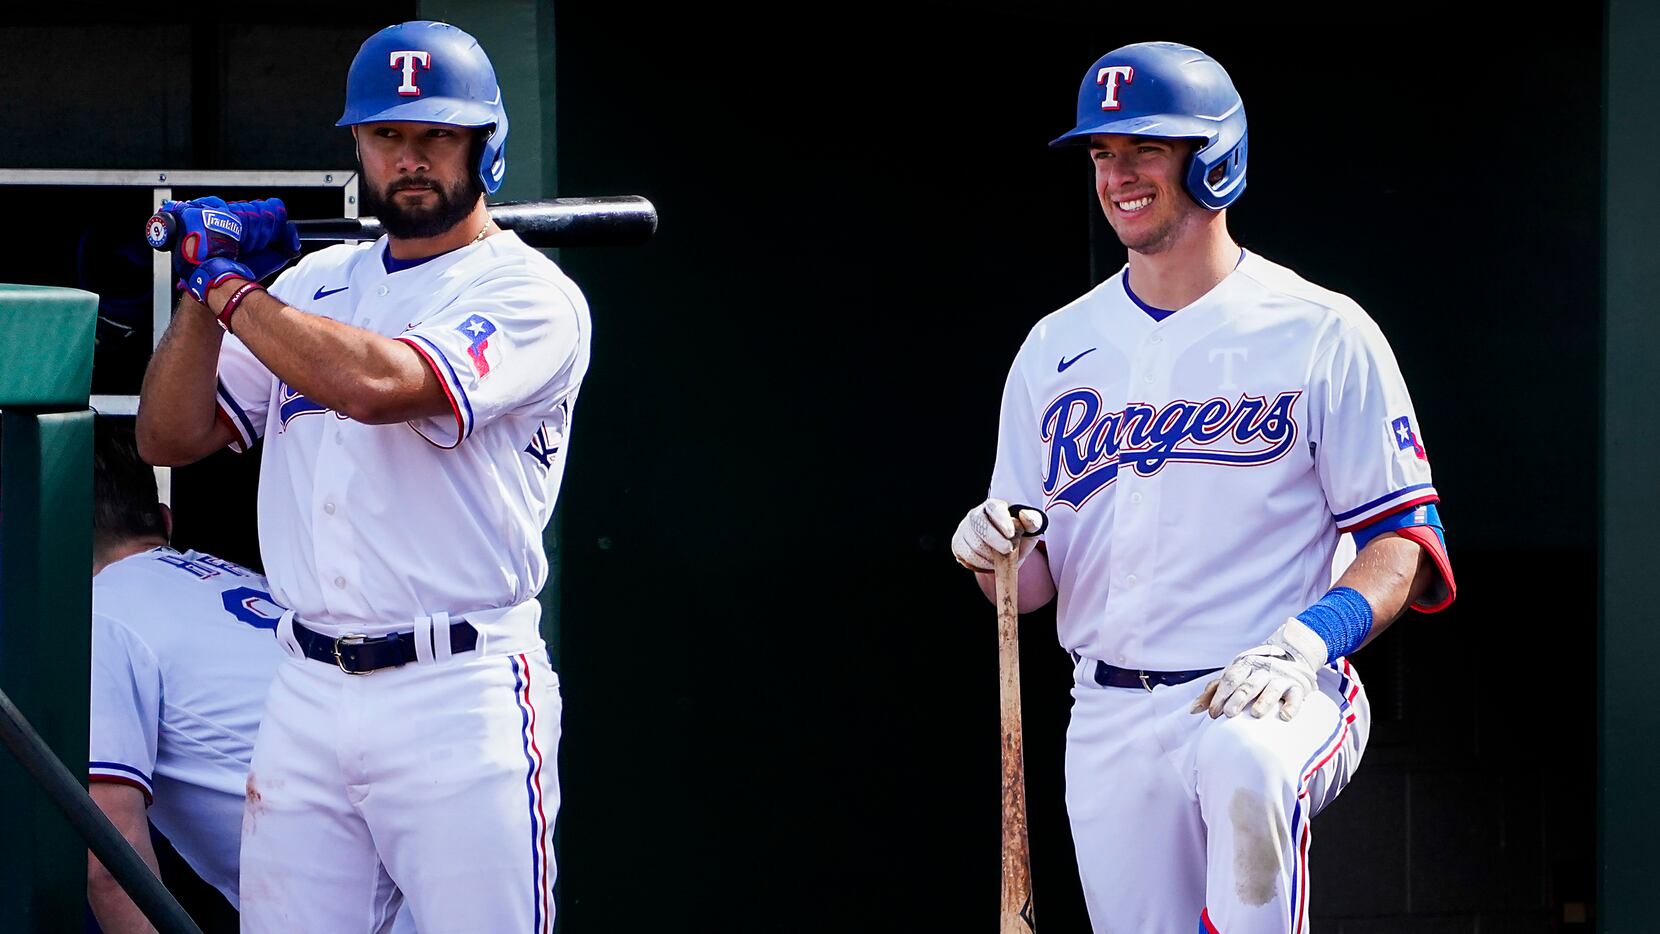 Joey Gallo, Todd Frazier, Rougned Odor & More Hit Bombs in Texas Rangers  Home Run Derby 